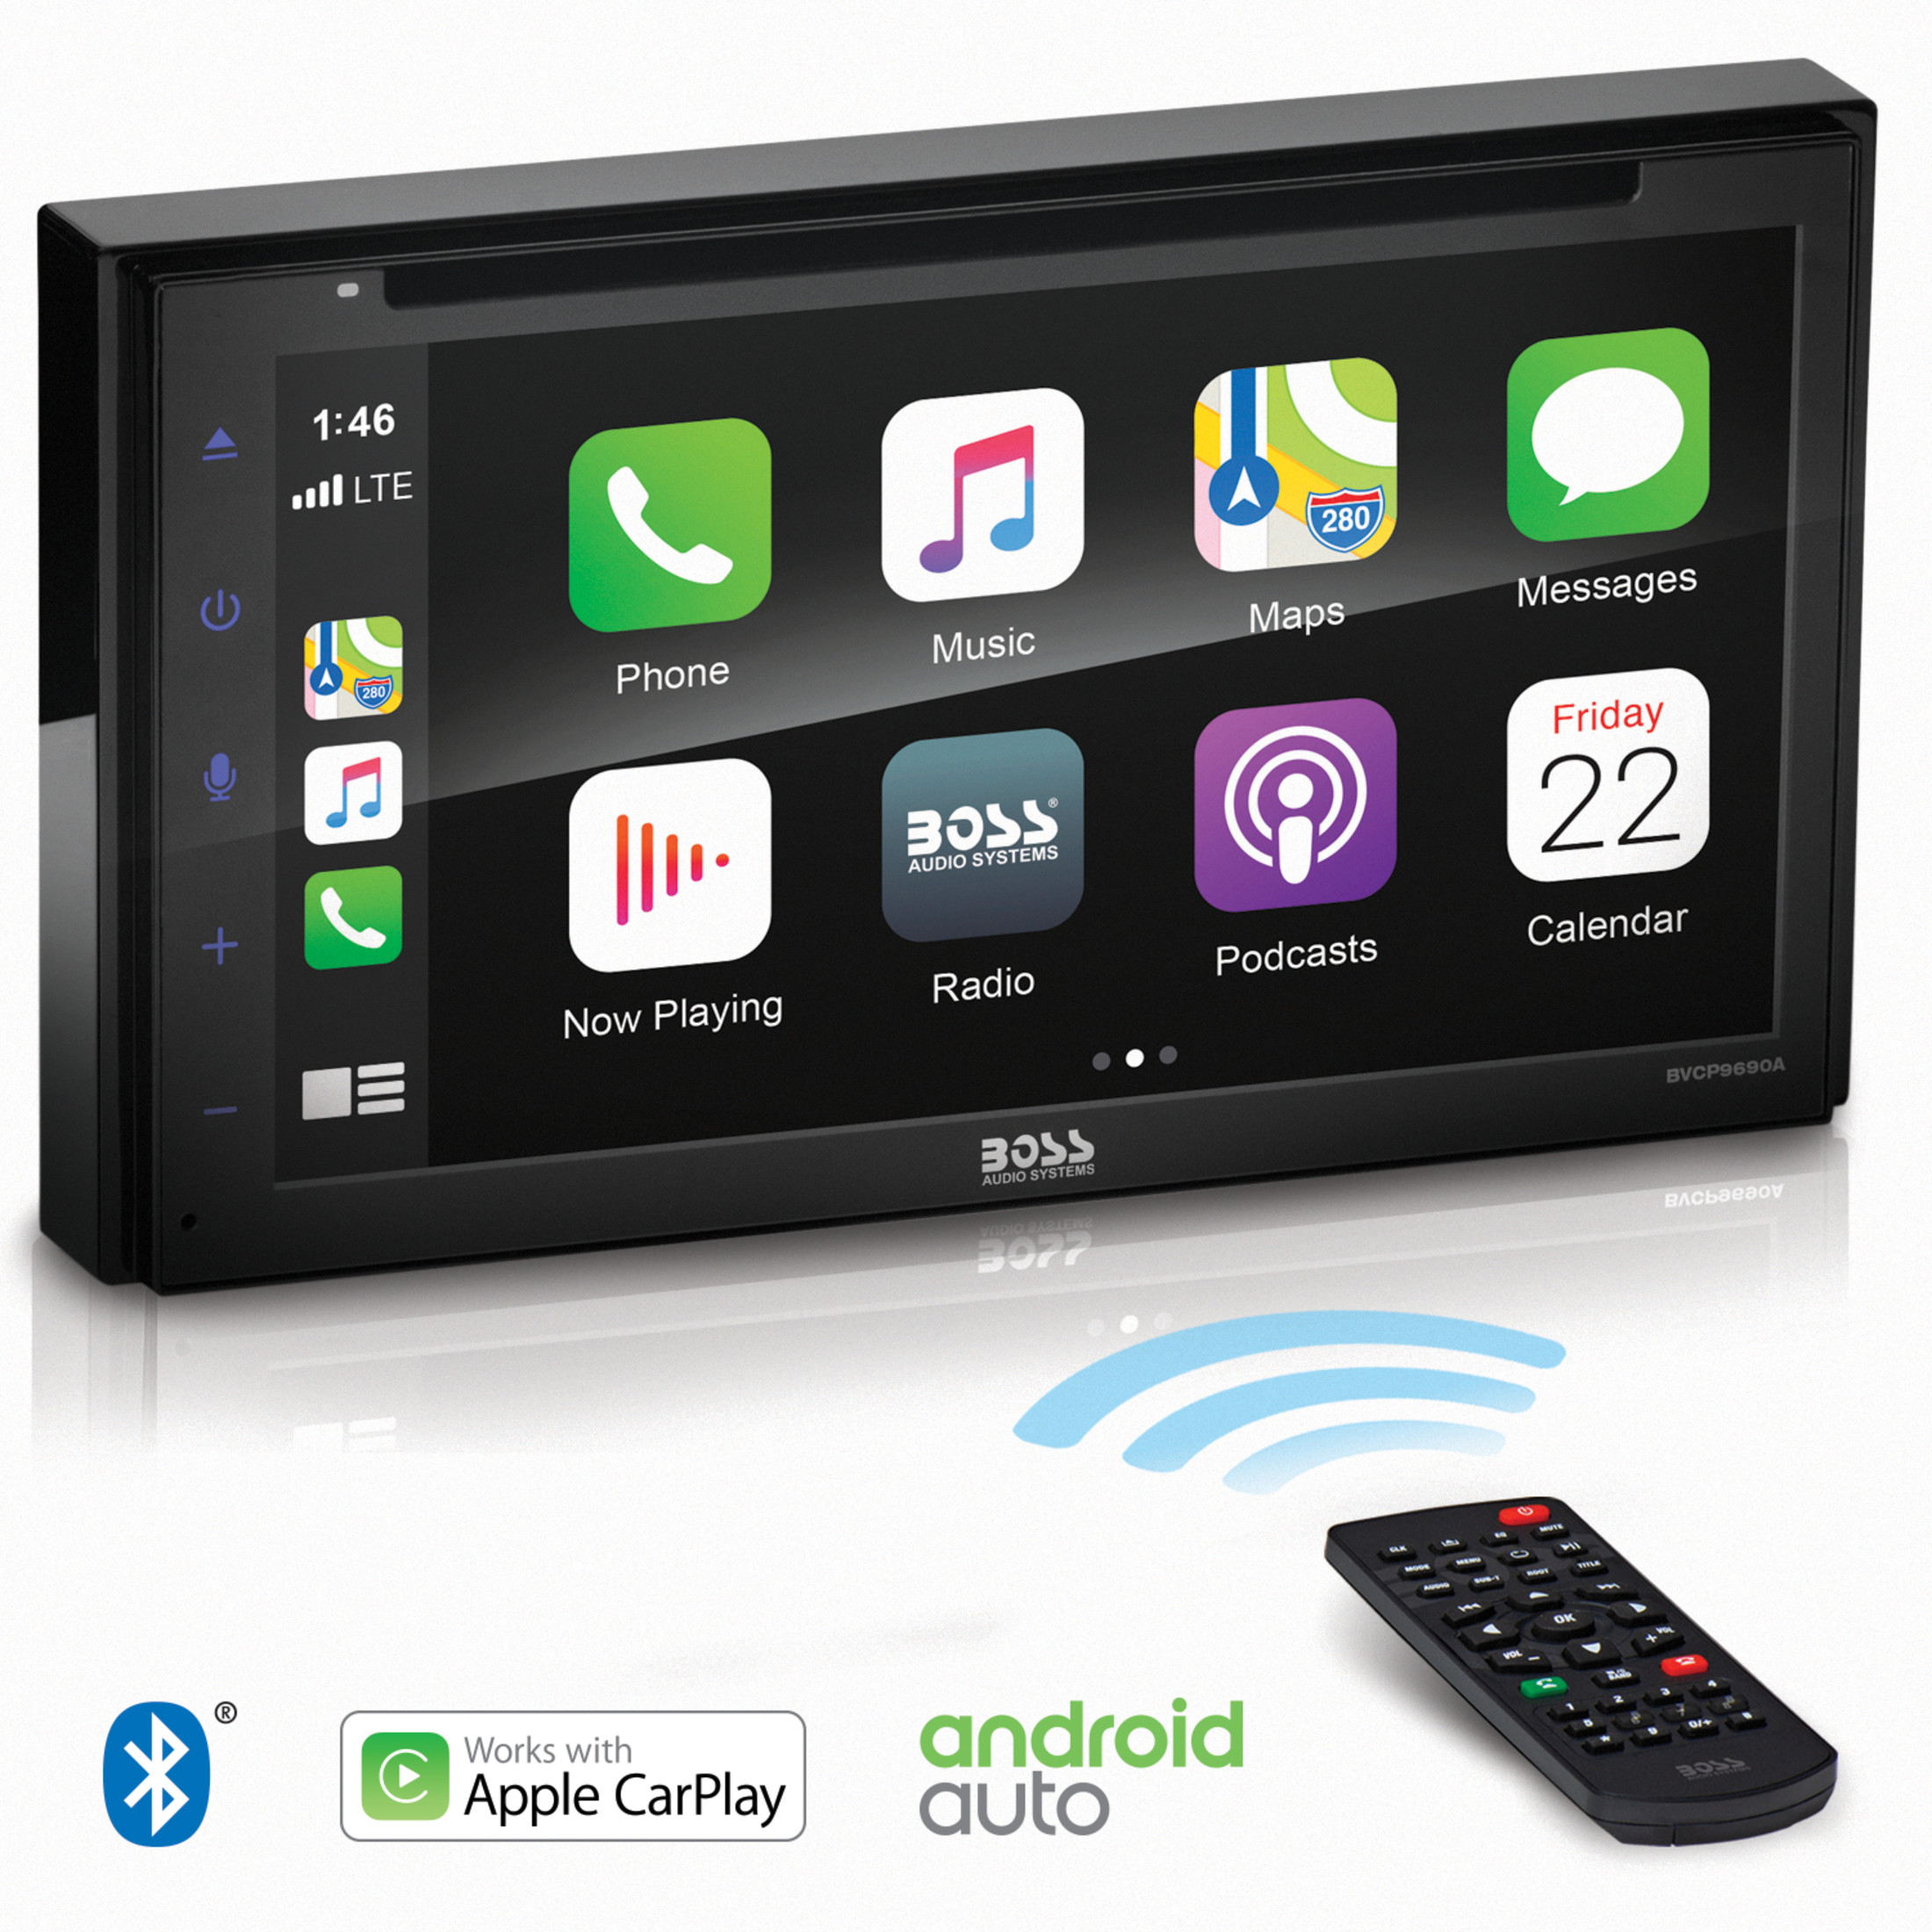 BOSS Audio Systems BVCP9690A Car Stereo - Apple CarPlay, Android Auto, Double Din, 6.75 Inch Touchscreen, Bluetooth, CD DVD Player, AM/FM Radio Receiver, Wireless Remote Control, USB - image 1 of 13